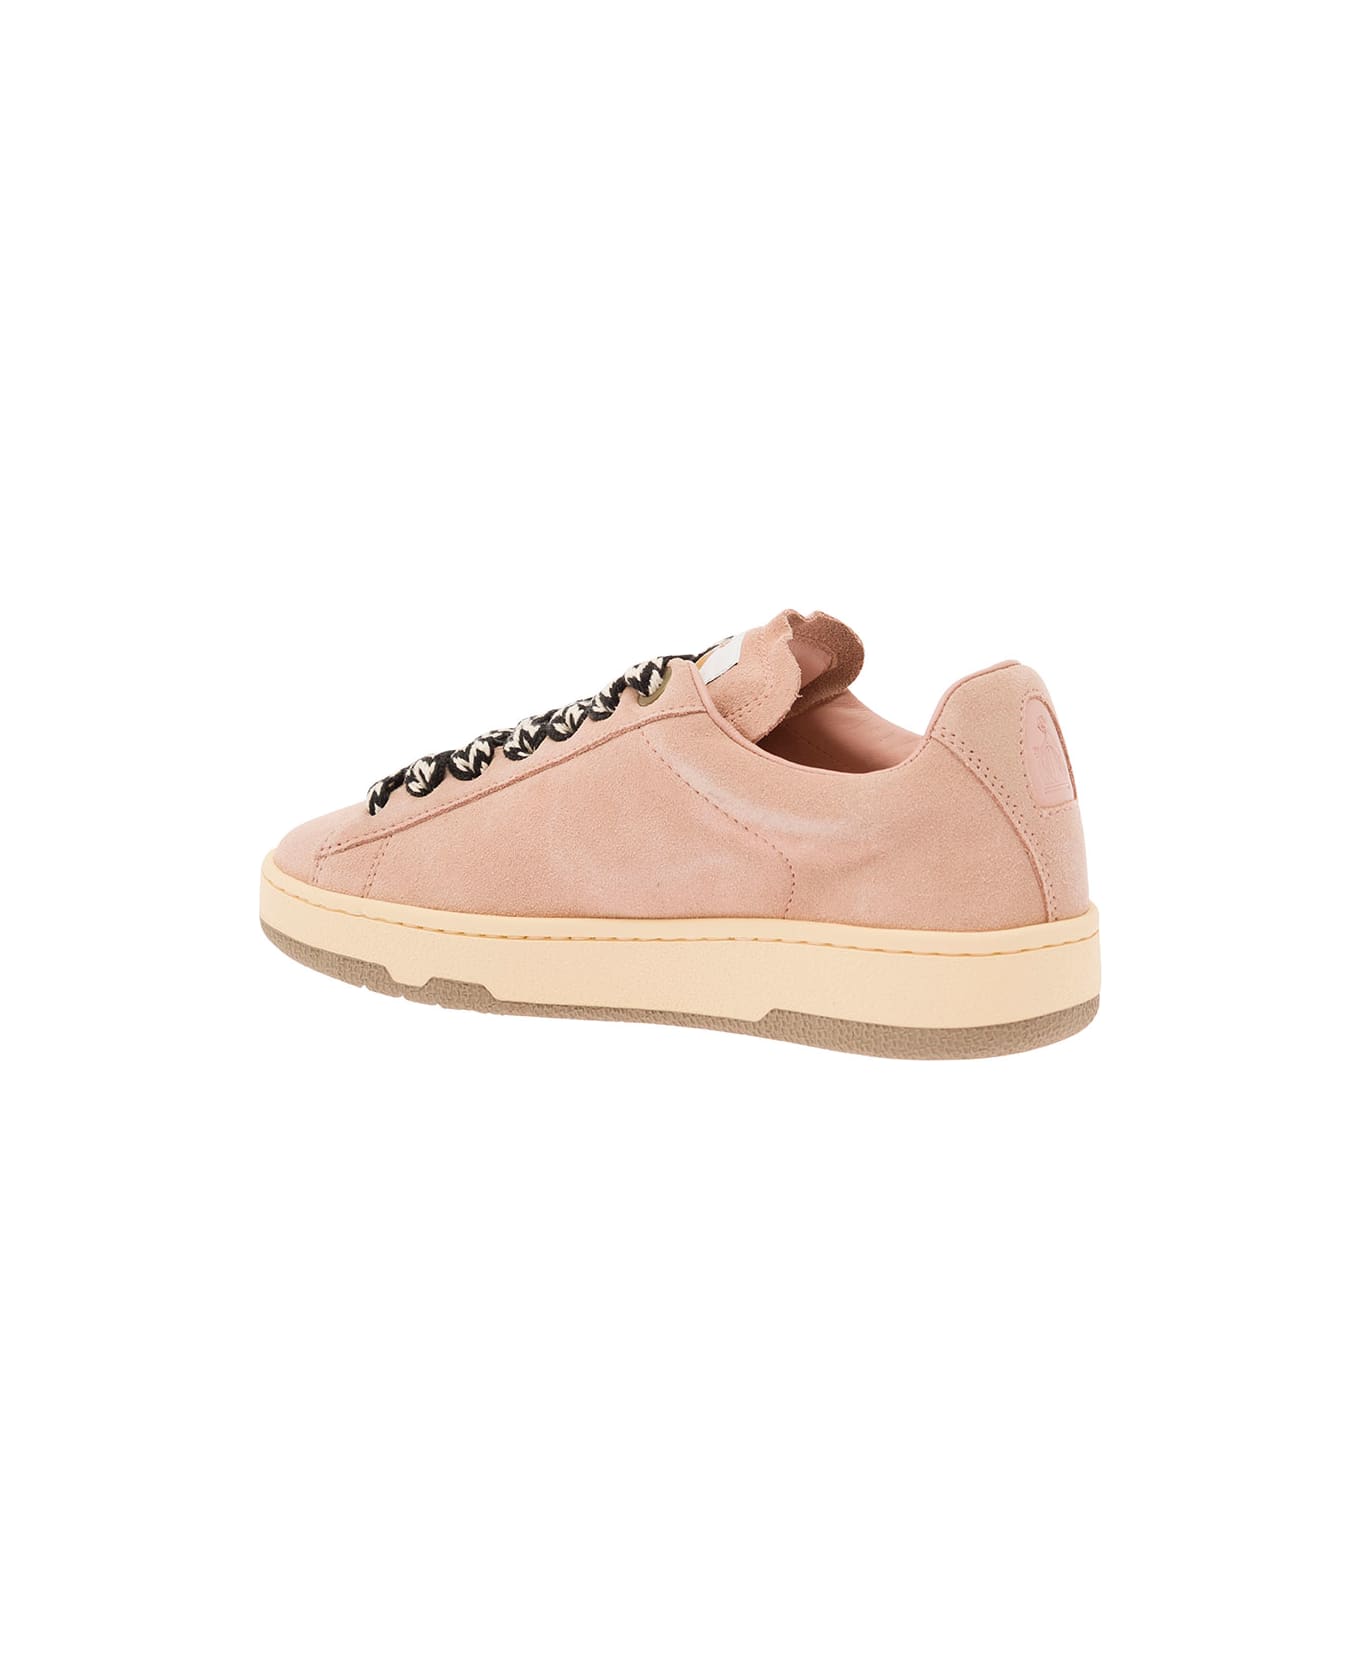 Lanvin 'lite Curb' Pink Low Top Sneakers With Oversized Multicolor Laces In Suede Woman - Pink